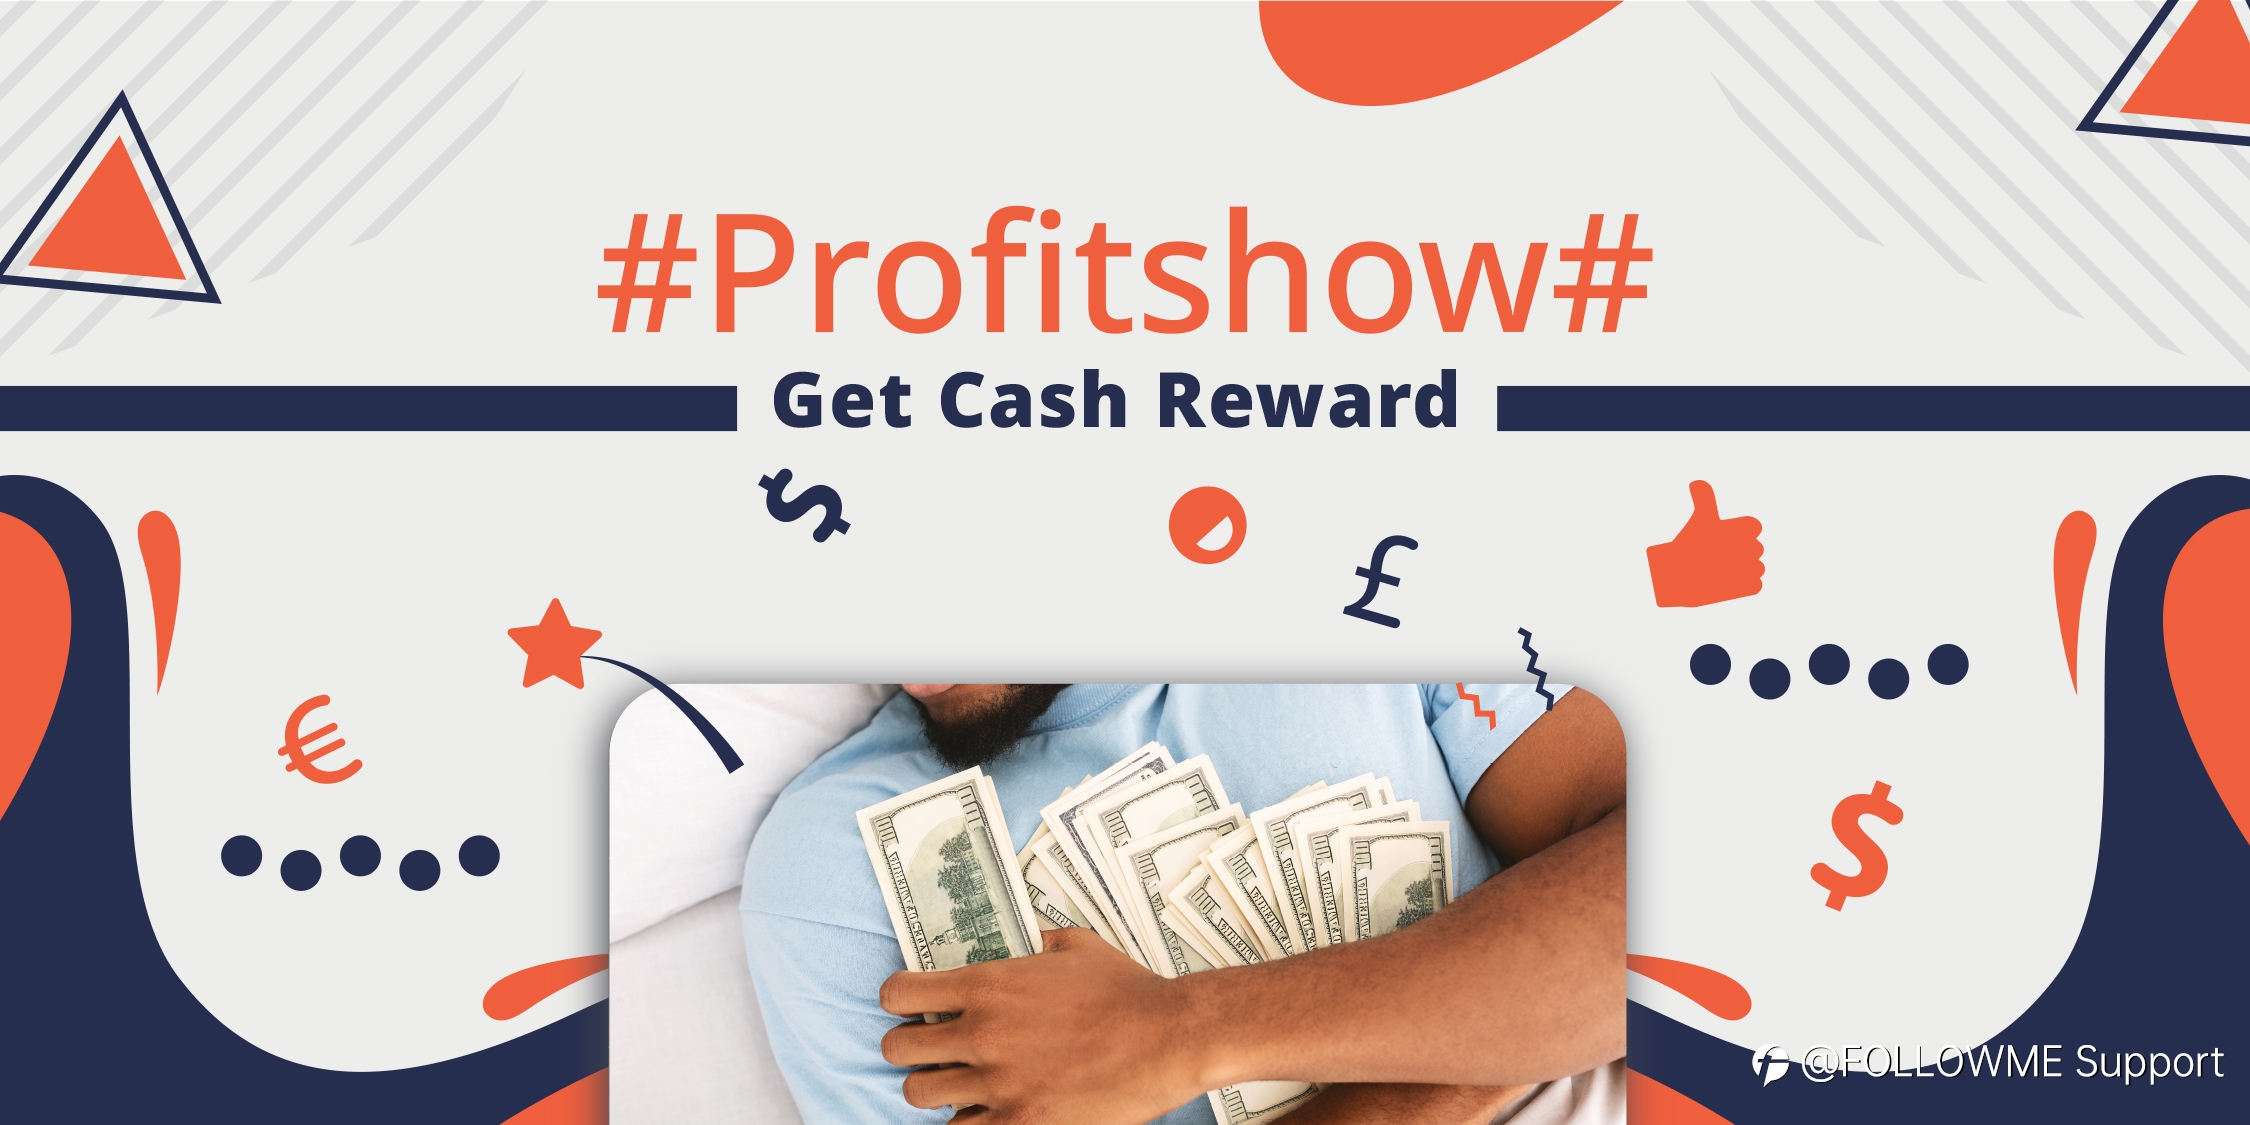 The right way to show your profit- #Profitshow# campaign notice